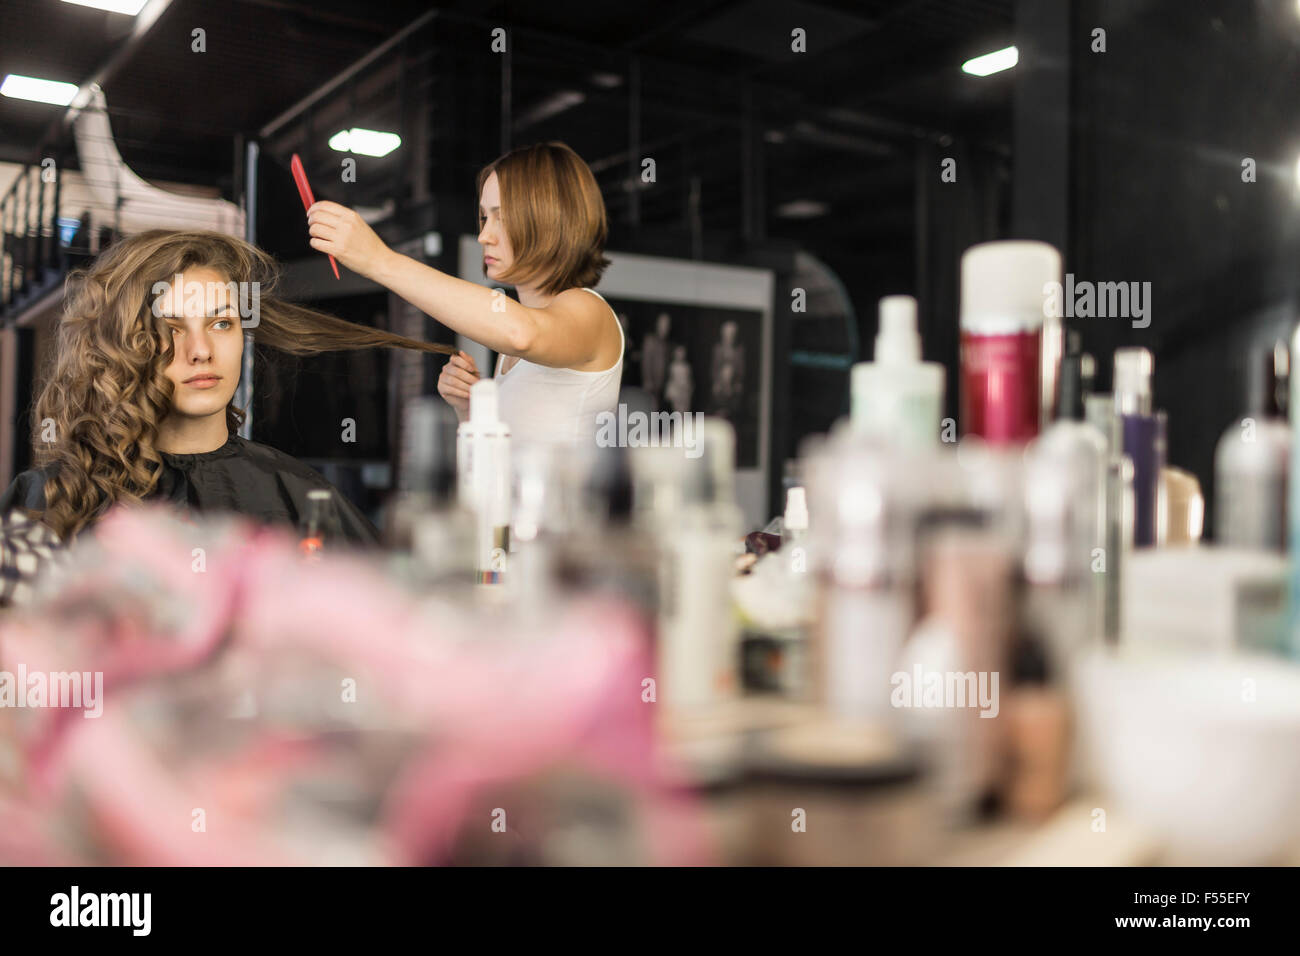 Hairdresser combing fashion model's hair Stock Photo